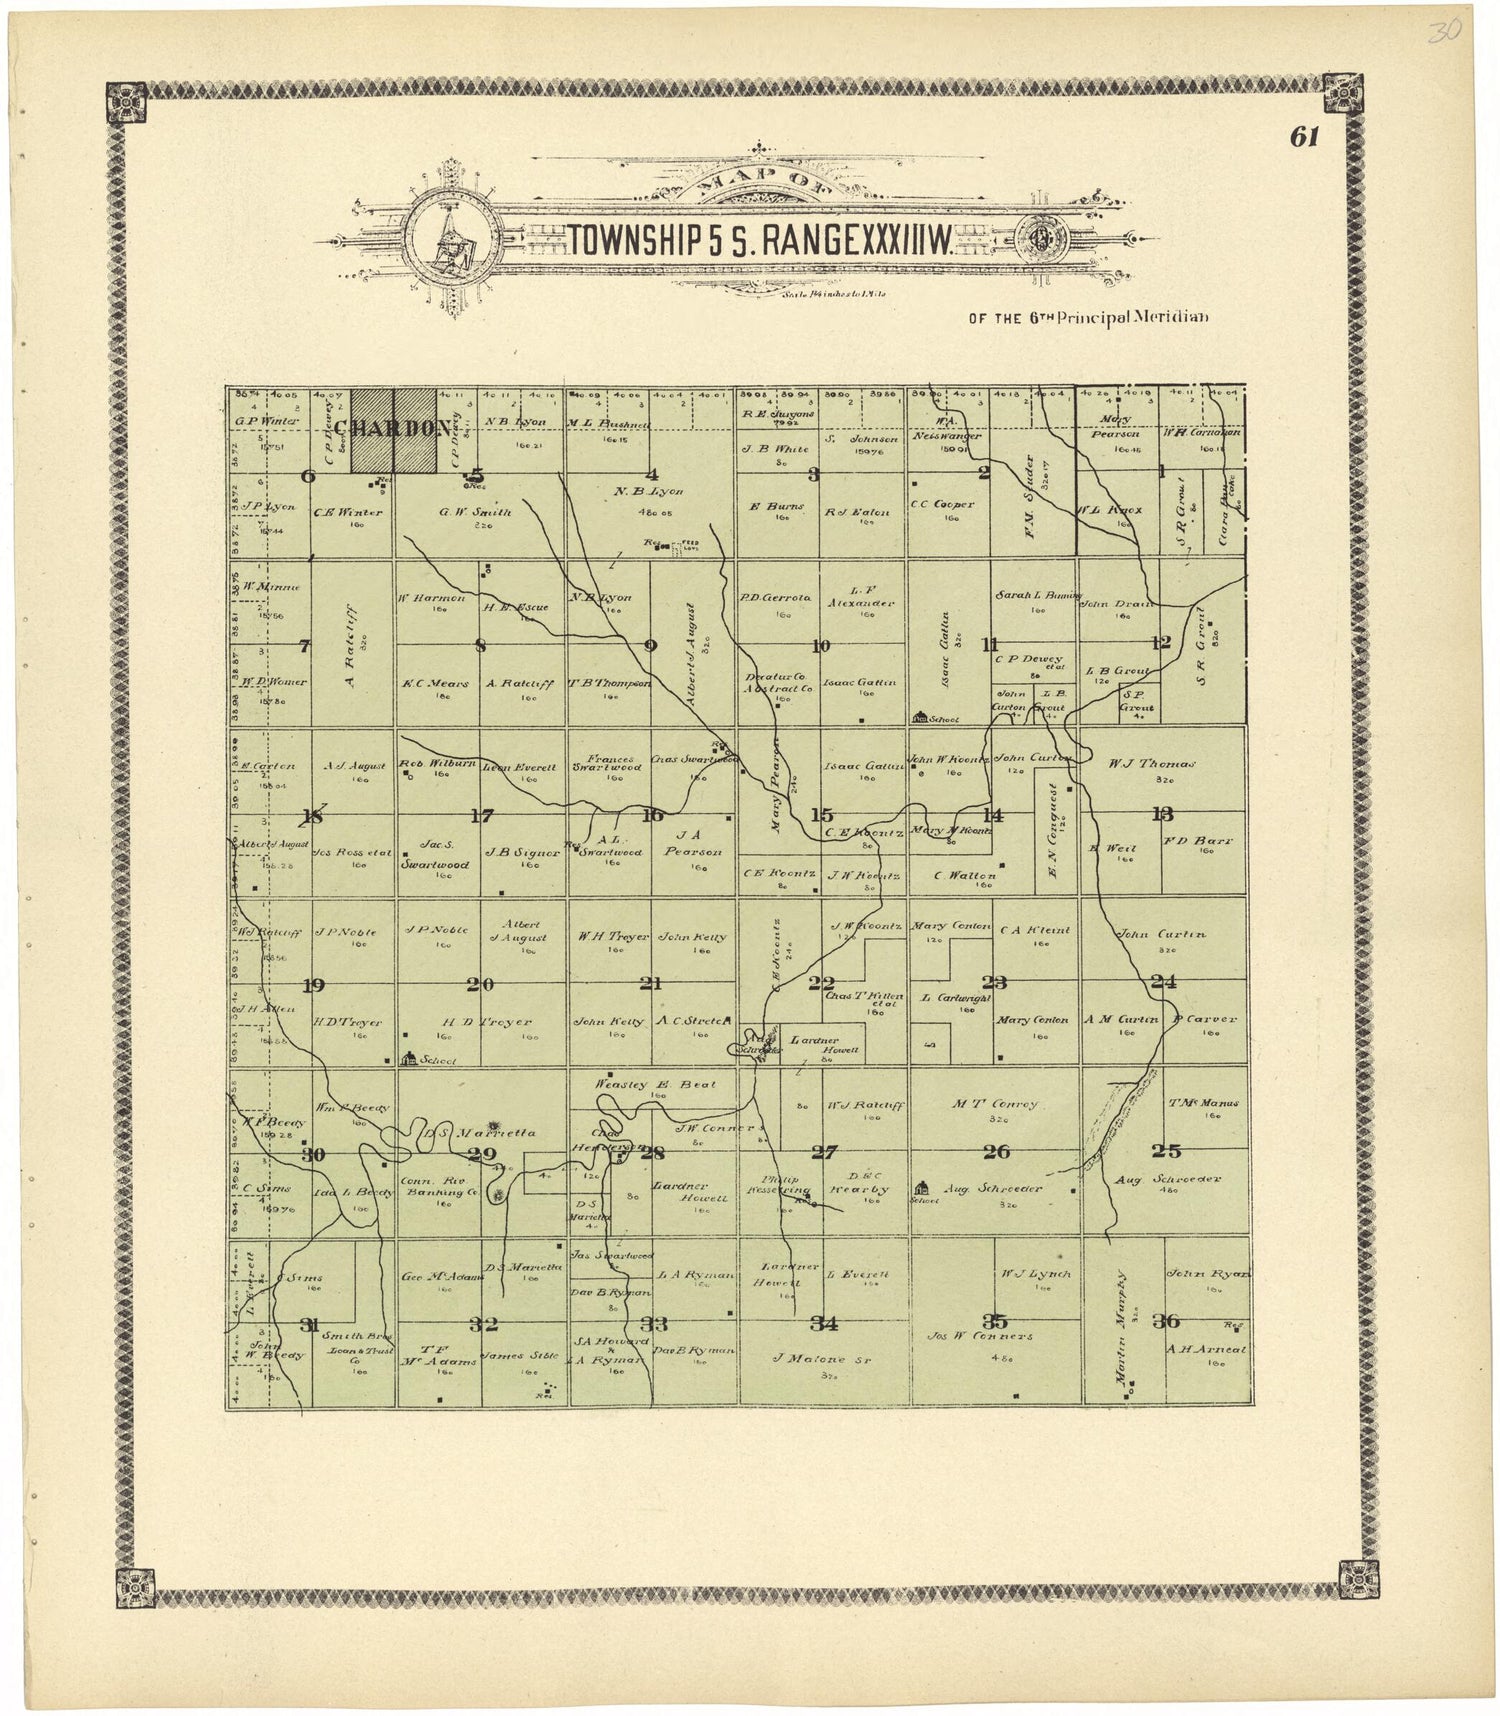 This old map of Map of Township 5 S. Range XXXIII W. from Standard Atlas of Rawlins County, Kansas from 1906 was created by  Geo. A. Ogle &amp; Co in 1906